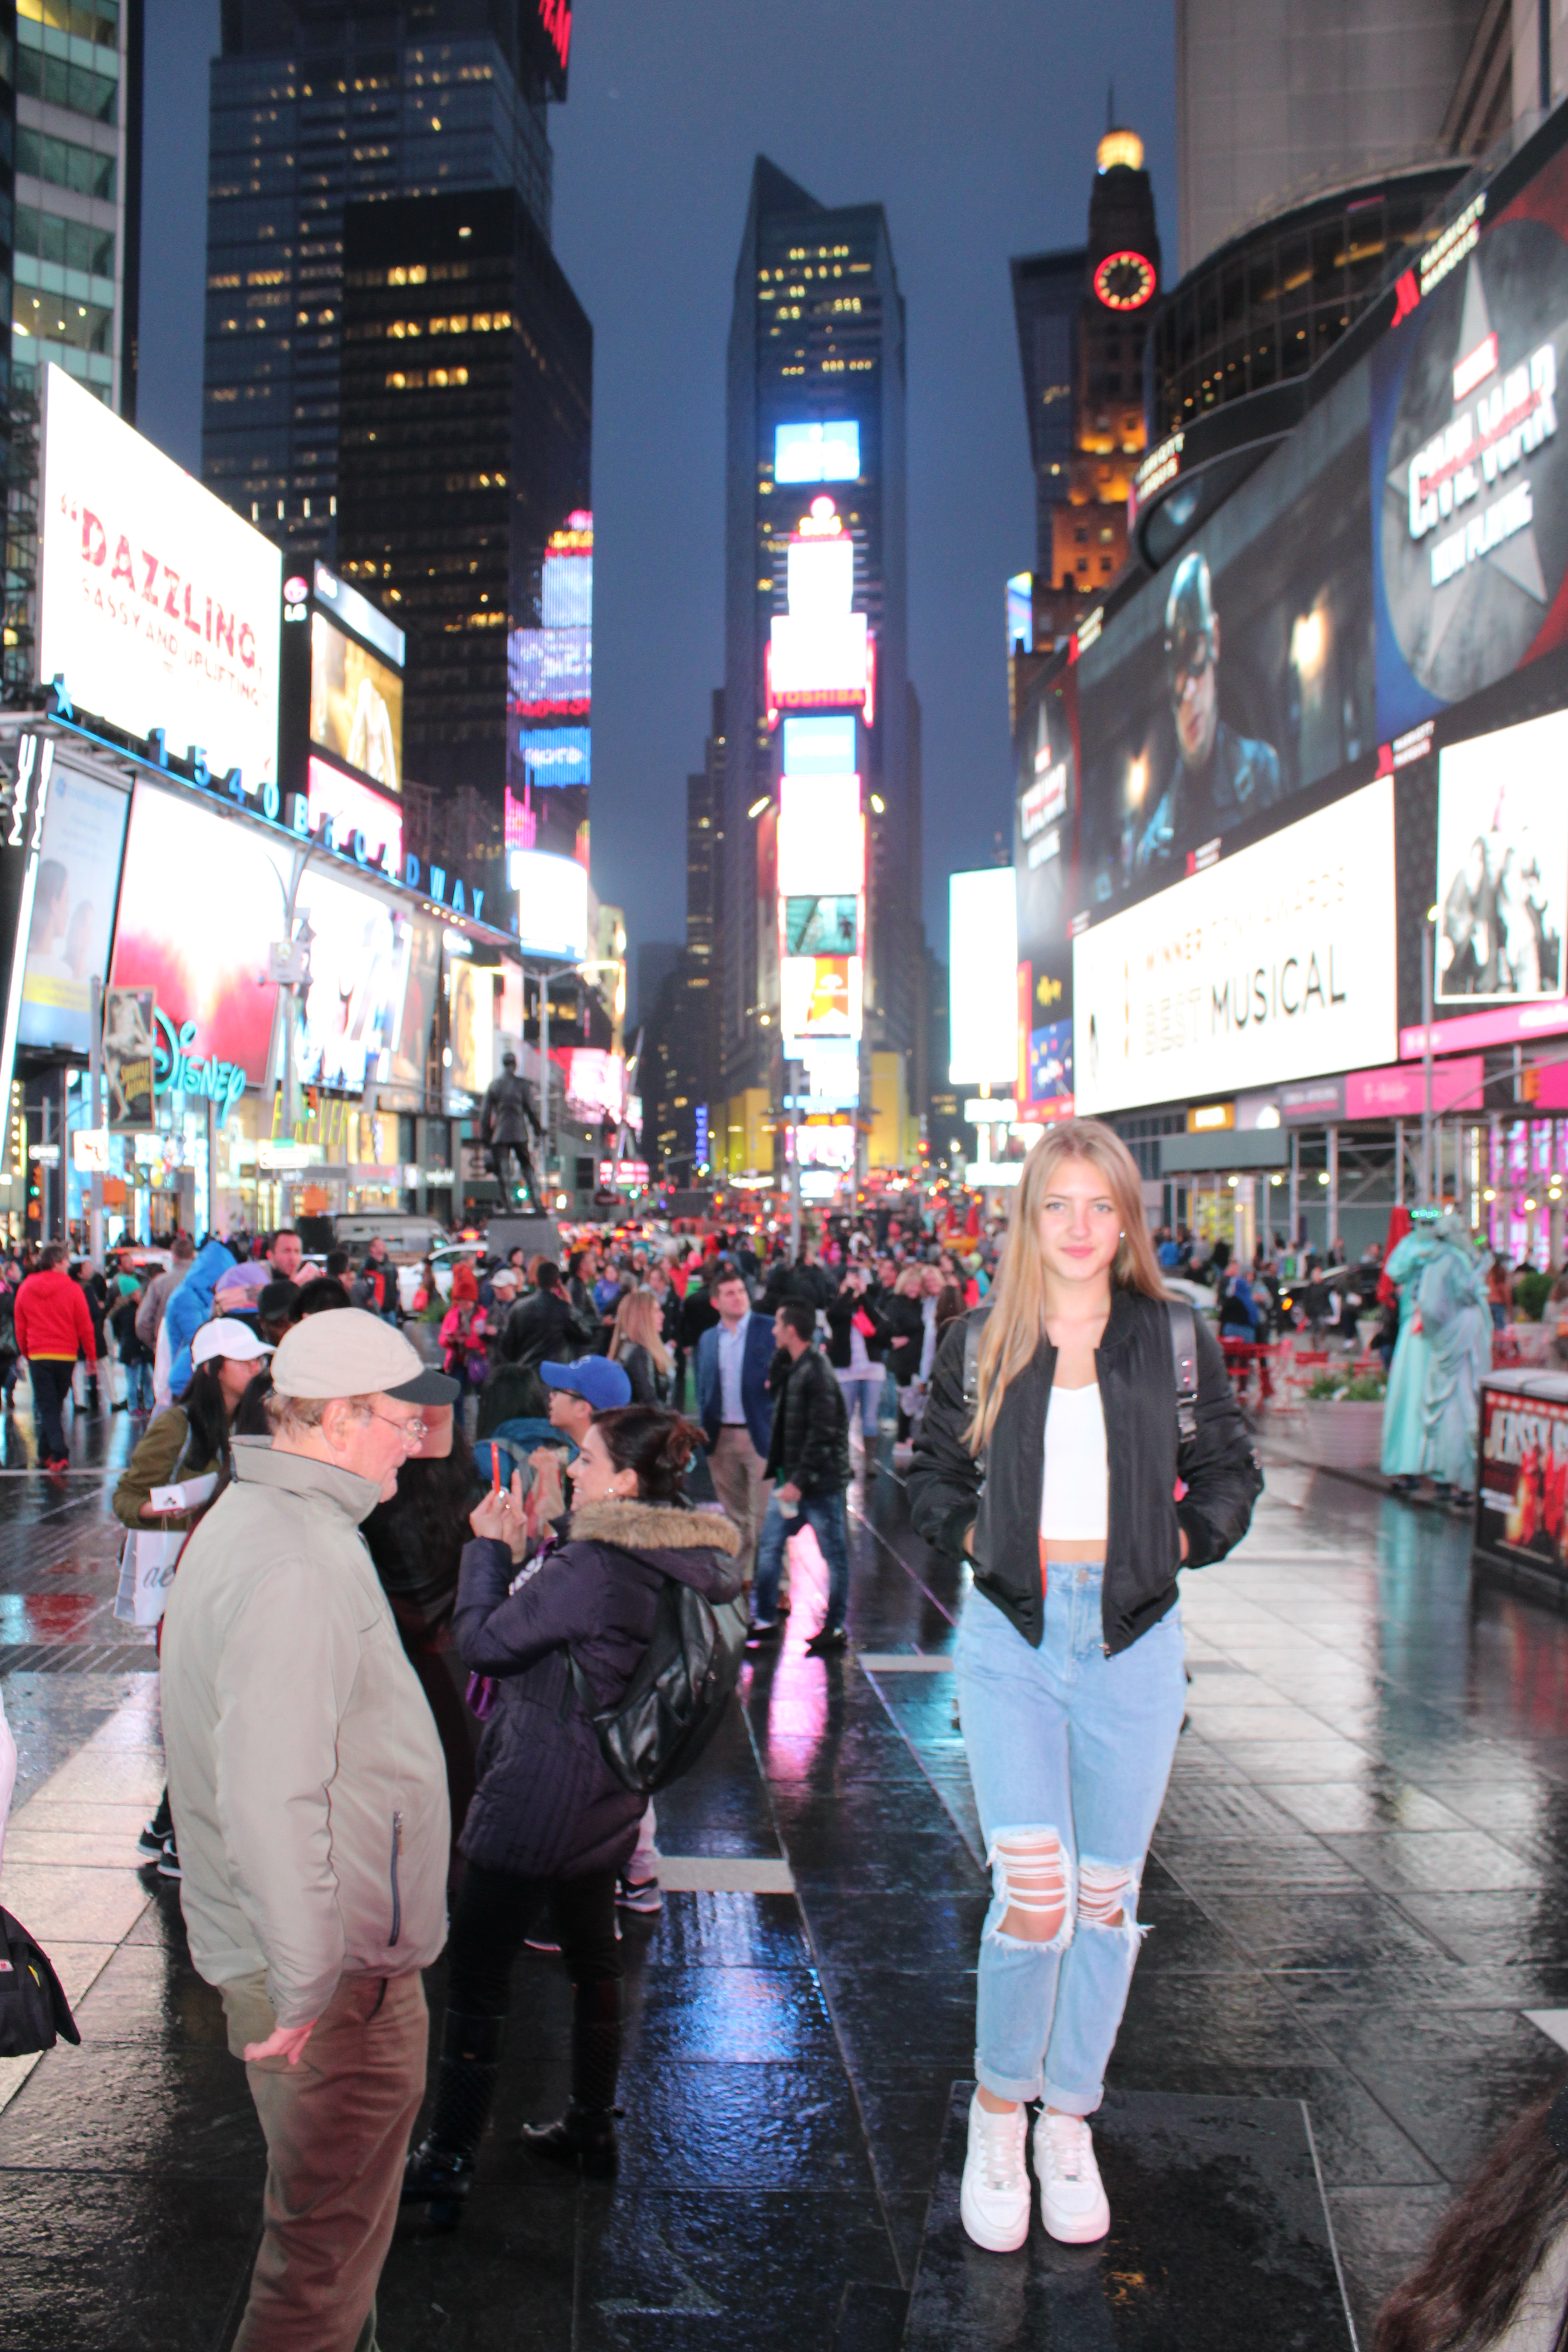 This image is an image of me in Times Square